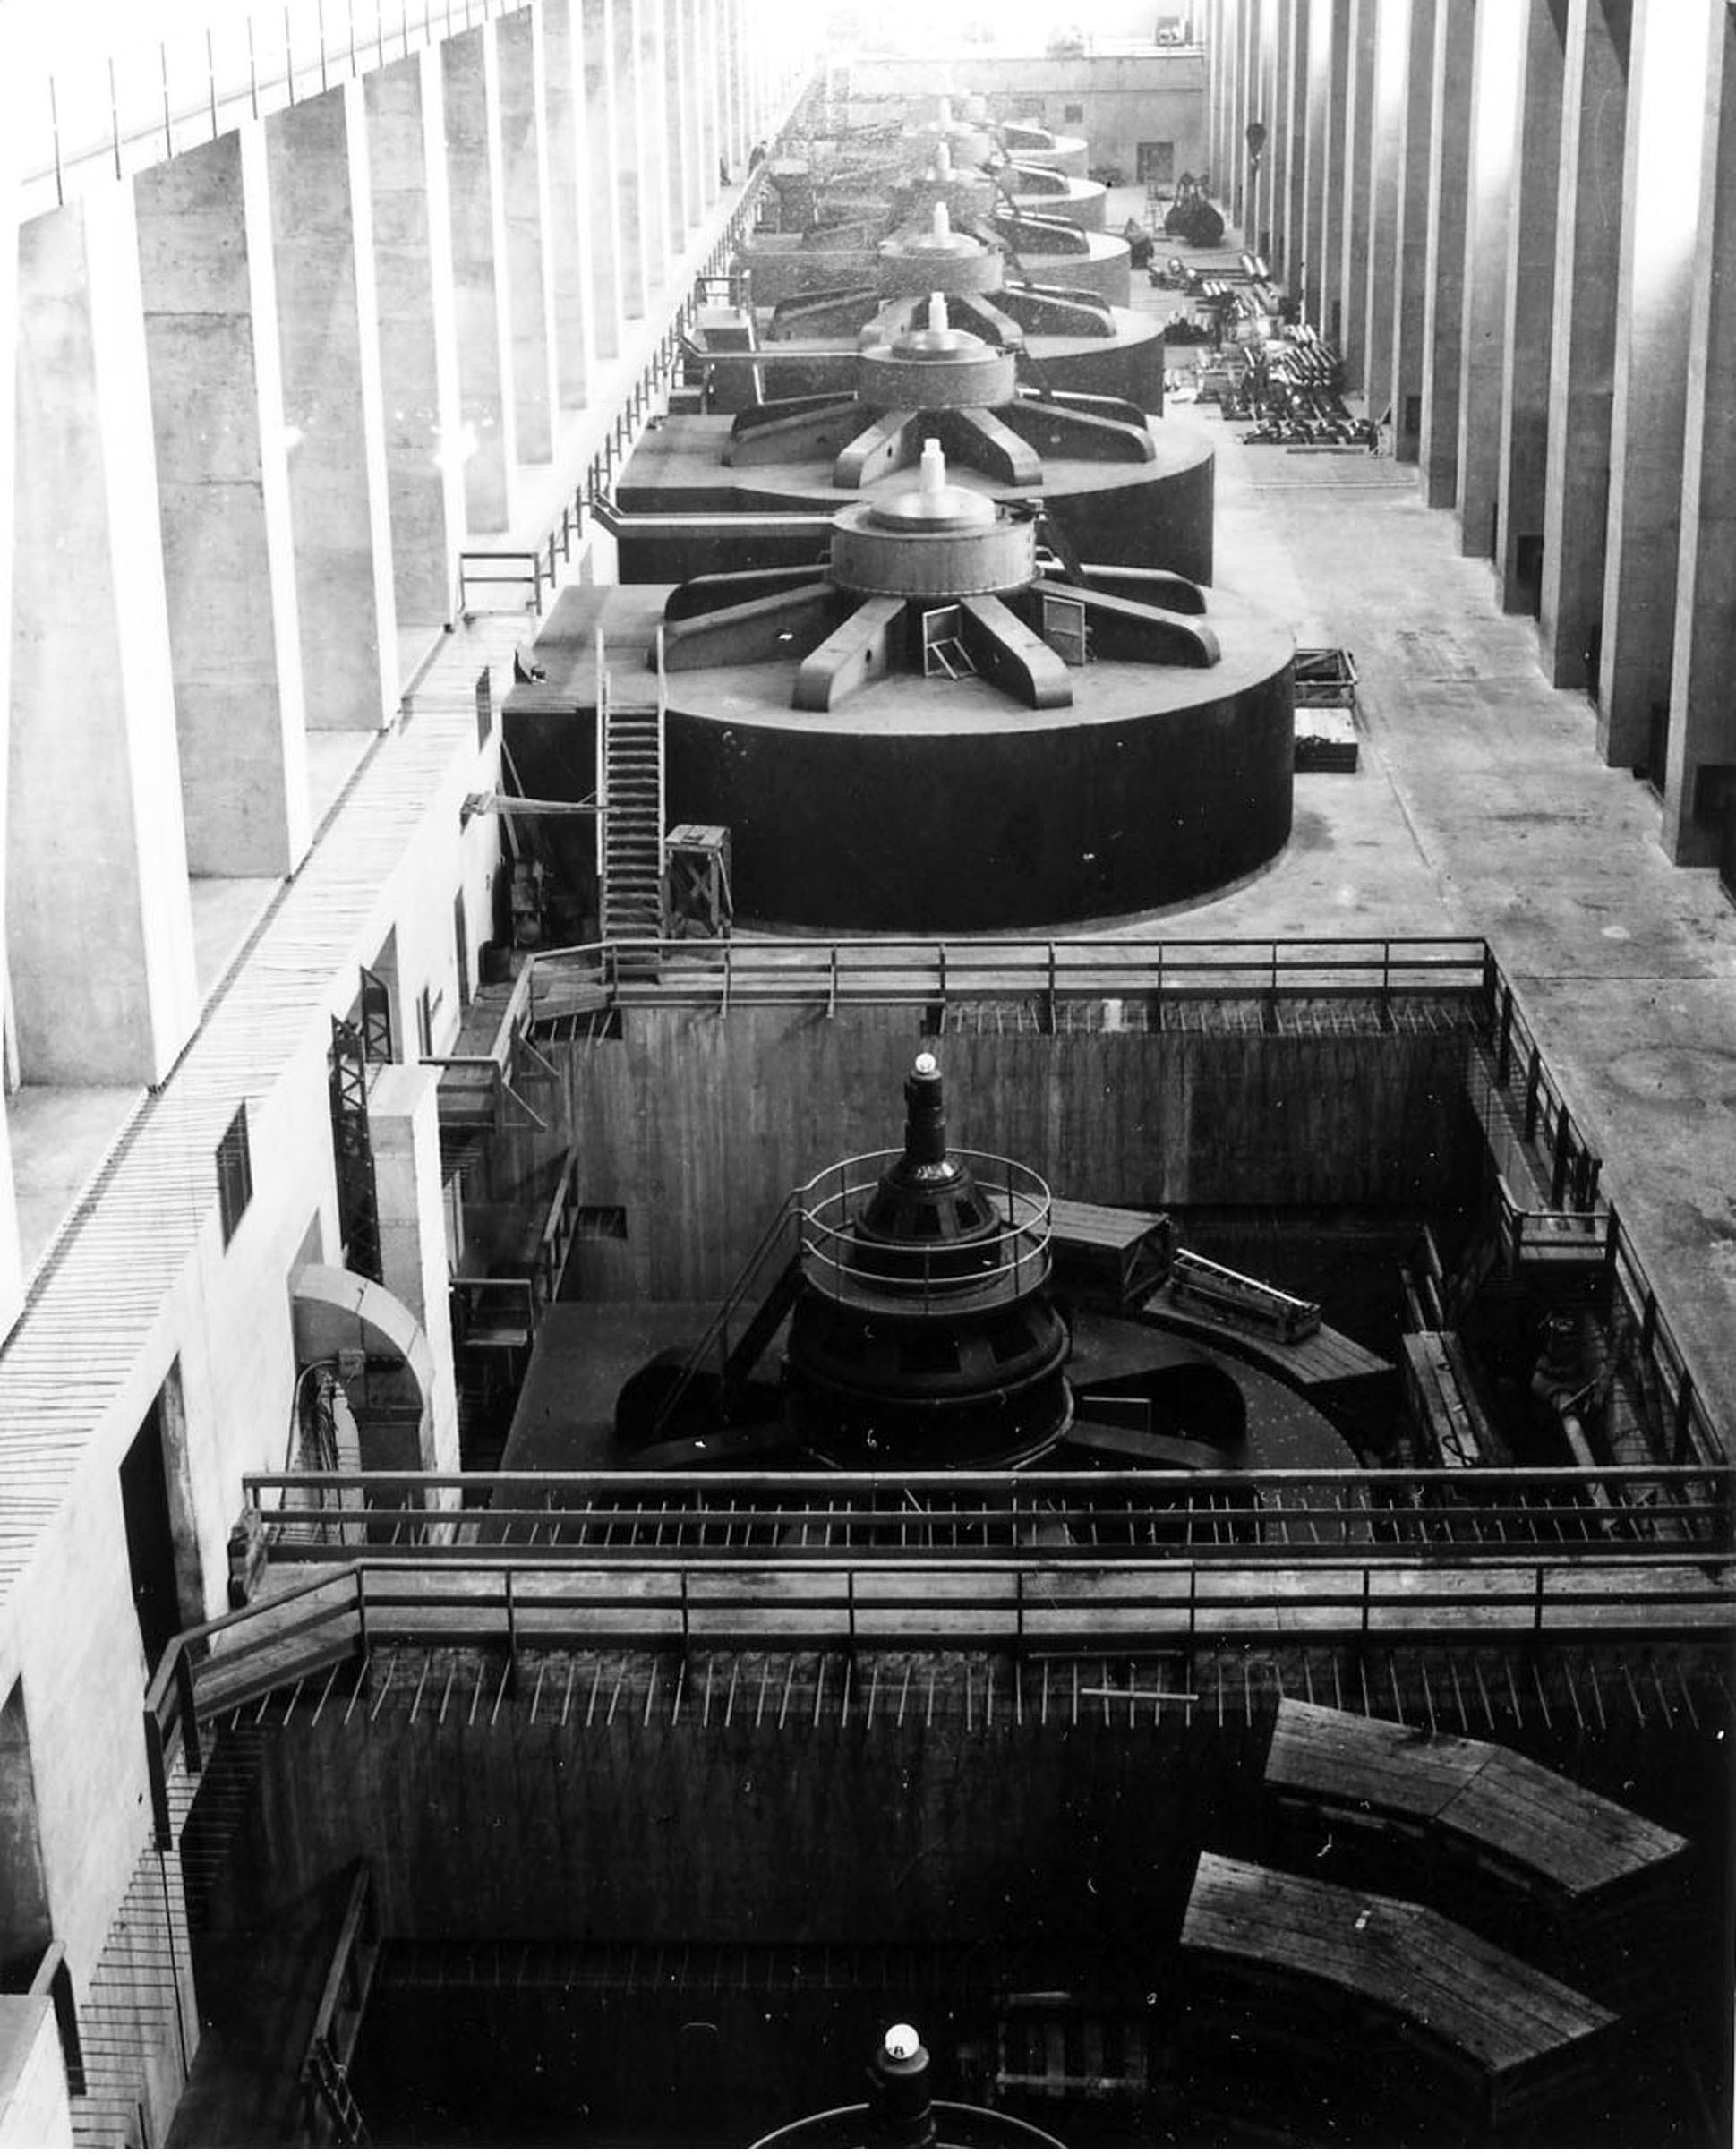 December 29, 1943. Interior of the west powerhouse at Grand Coulee Dam.